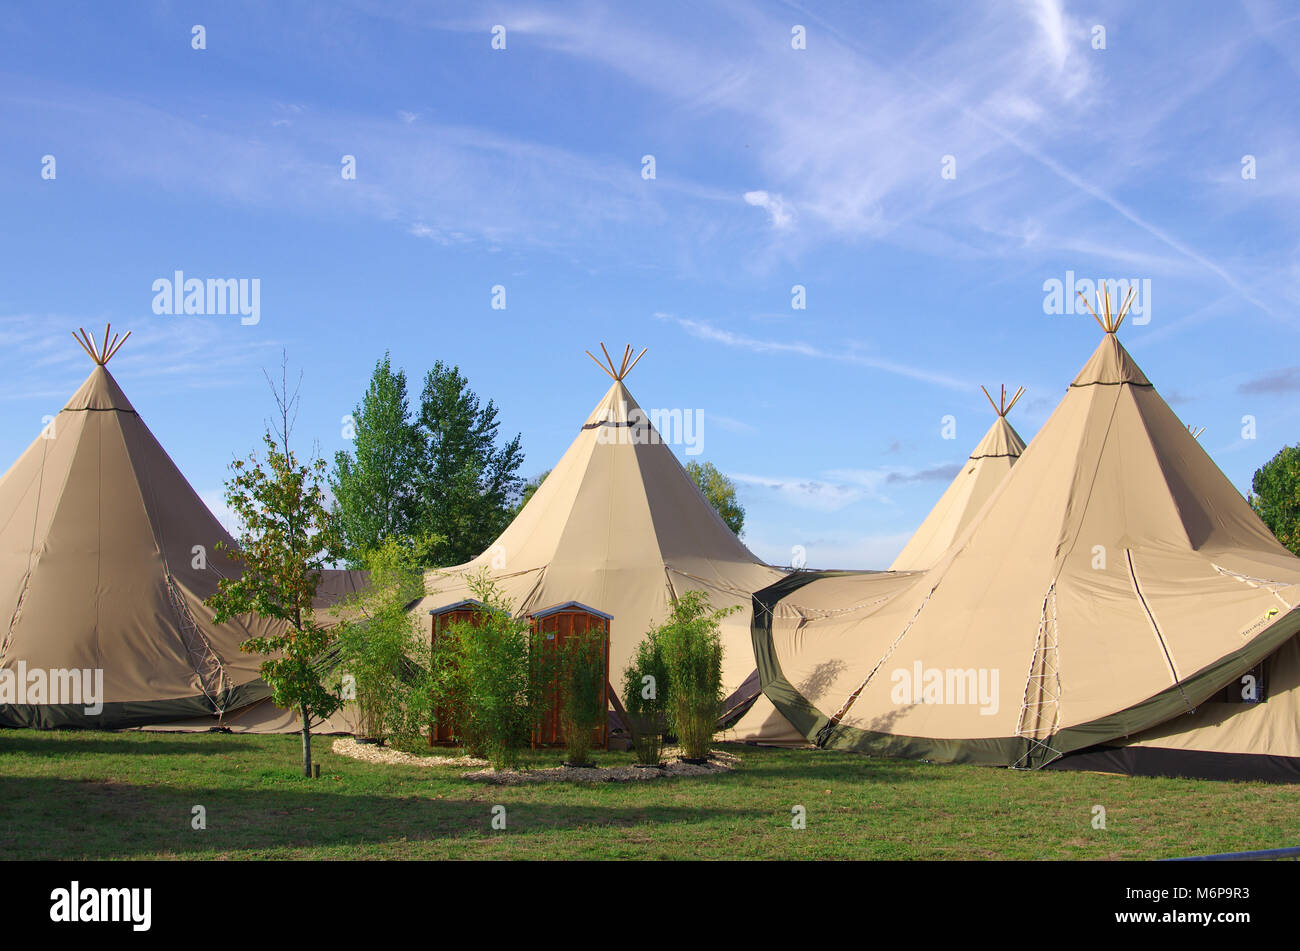 A group of traditional tipis in the nature Stock Photo